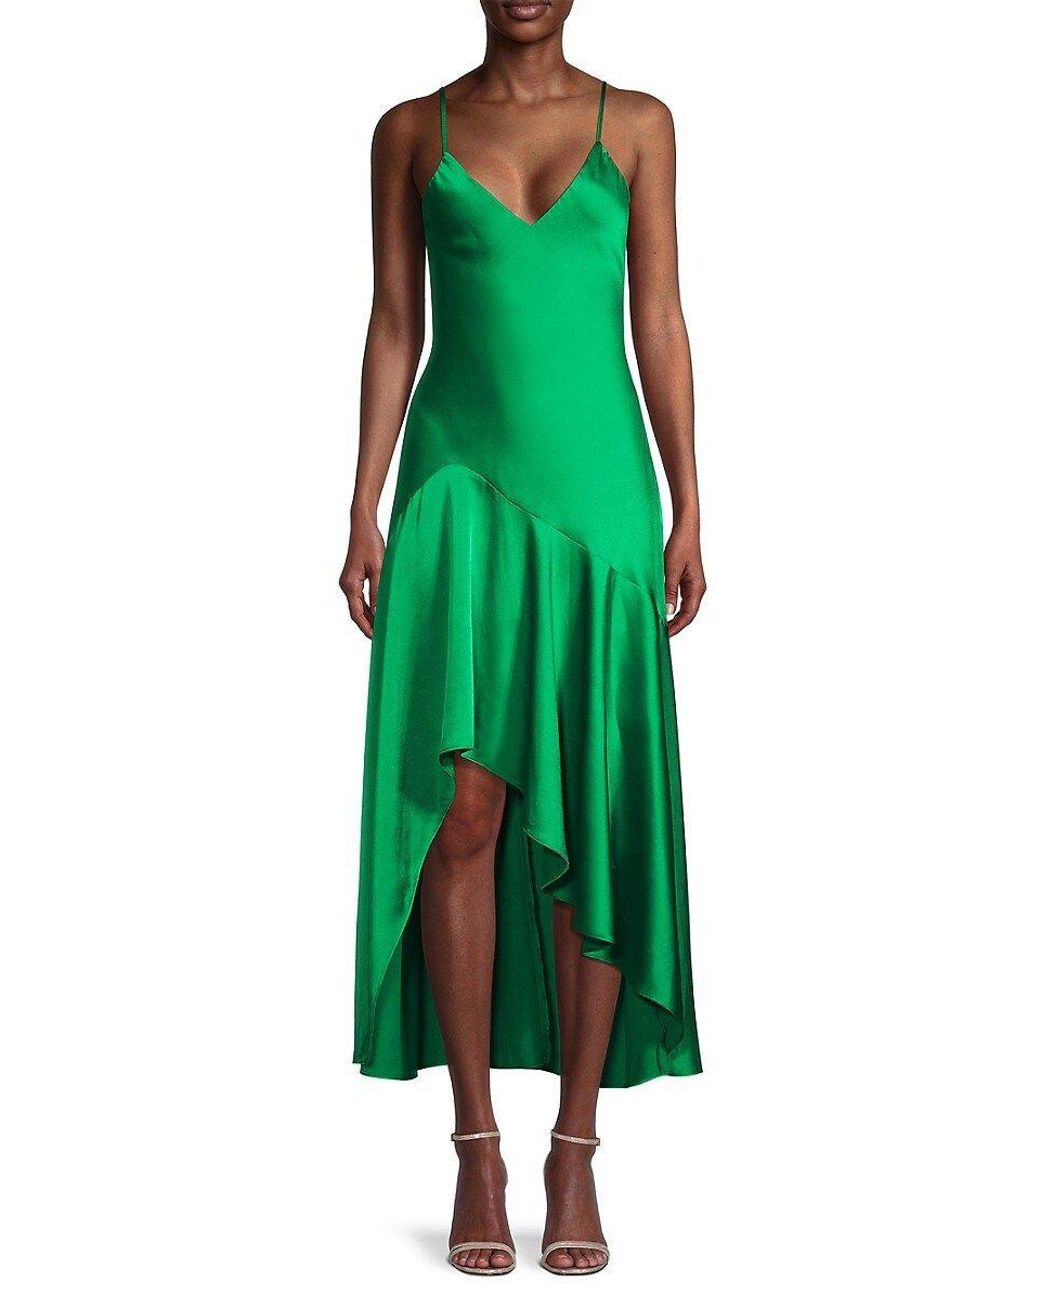 MILLY Kali High-low Satin Dress in Green | Lyst